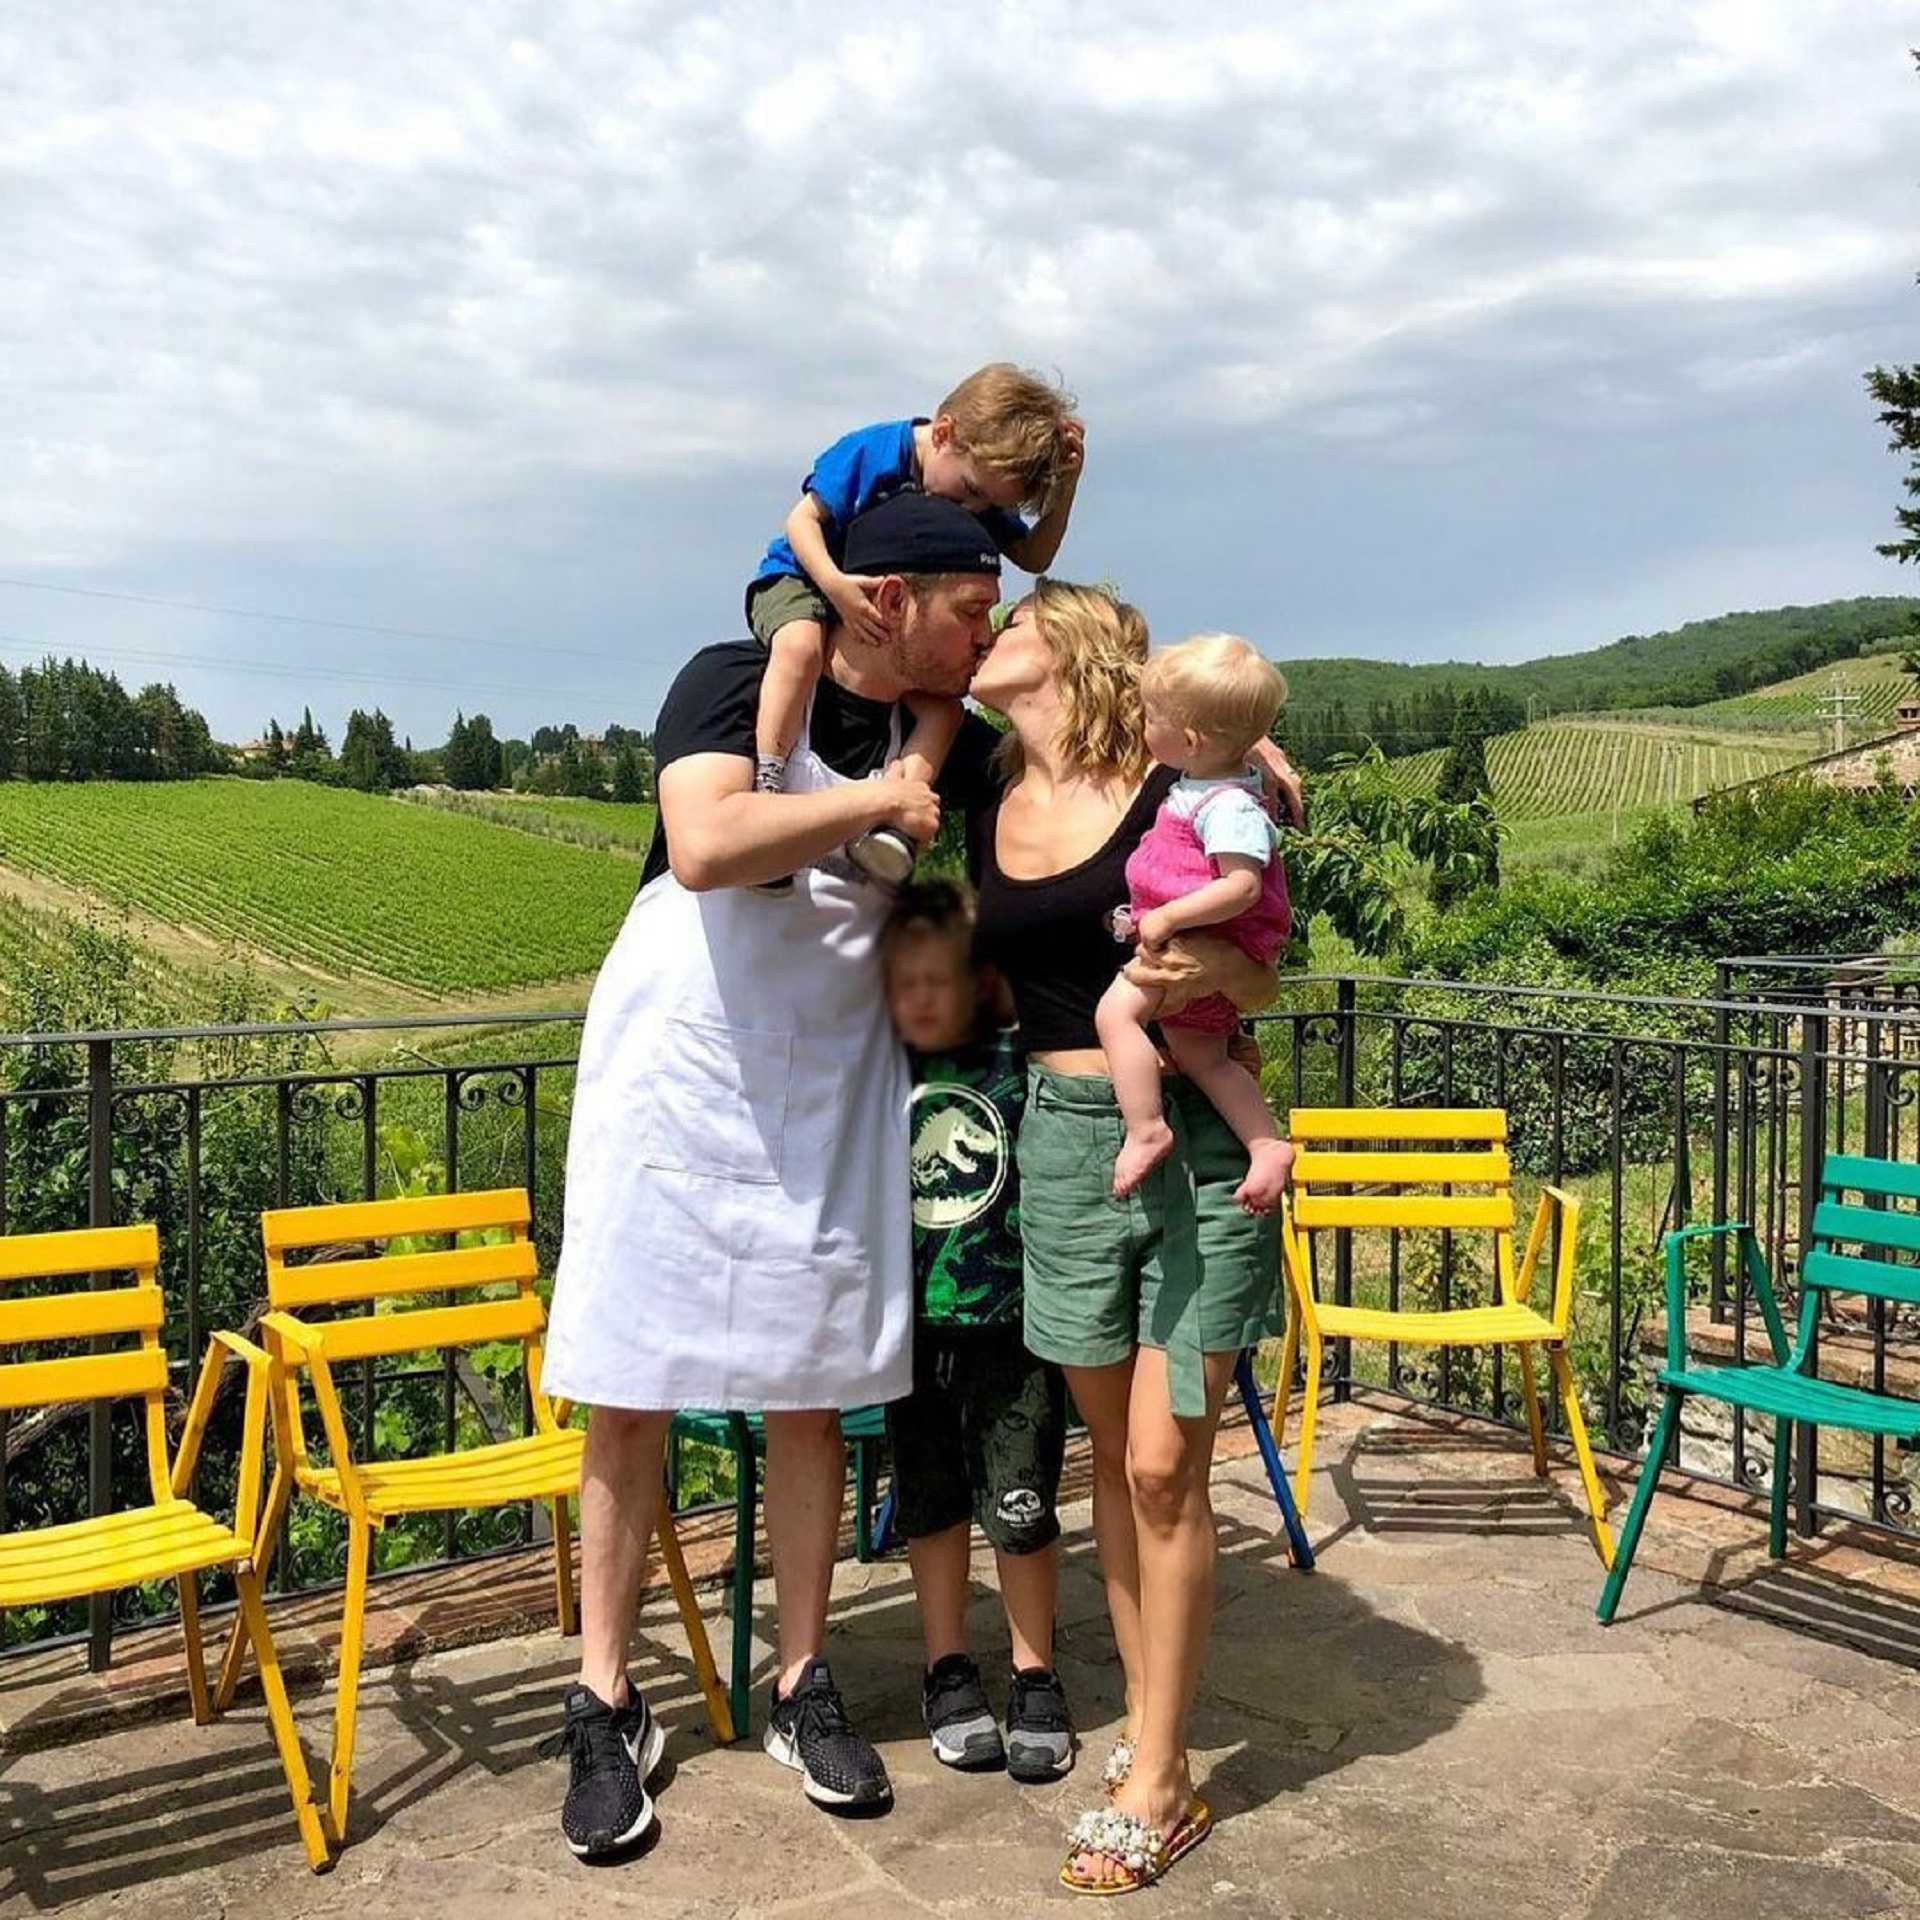 The romantic family photo: Noah in the middle of Luisana Lopilato, who holds Vida and Michael Bublé, with Elías on his shoulders